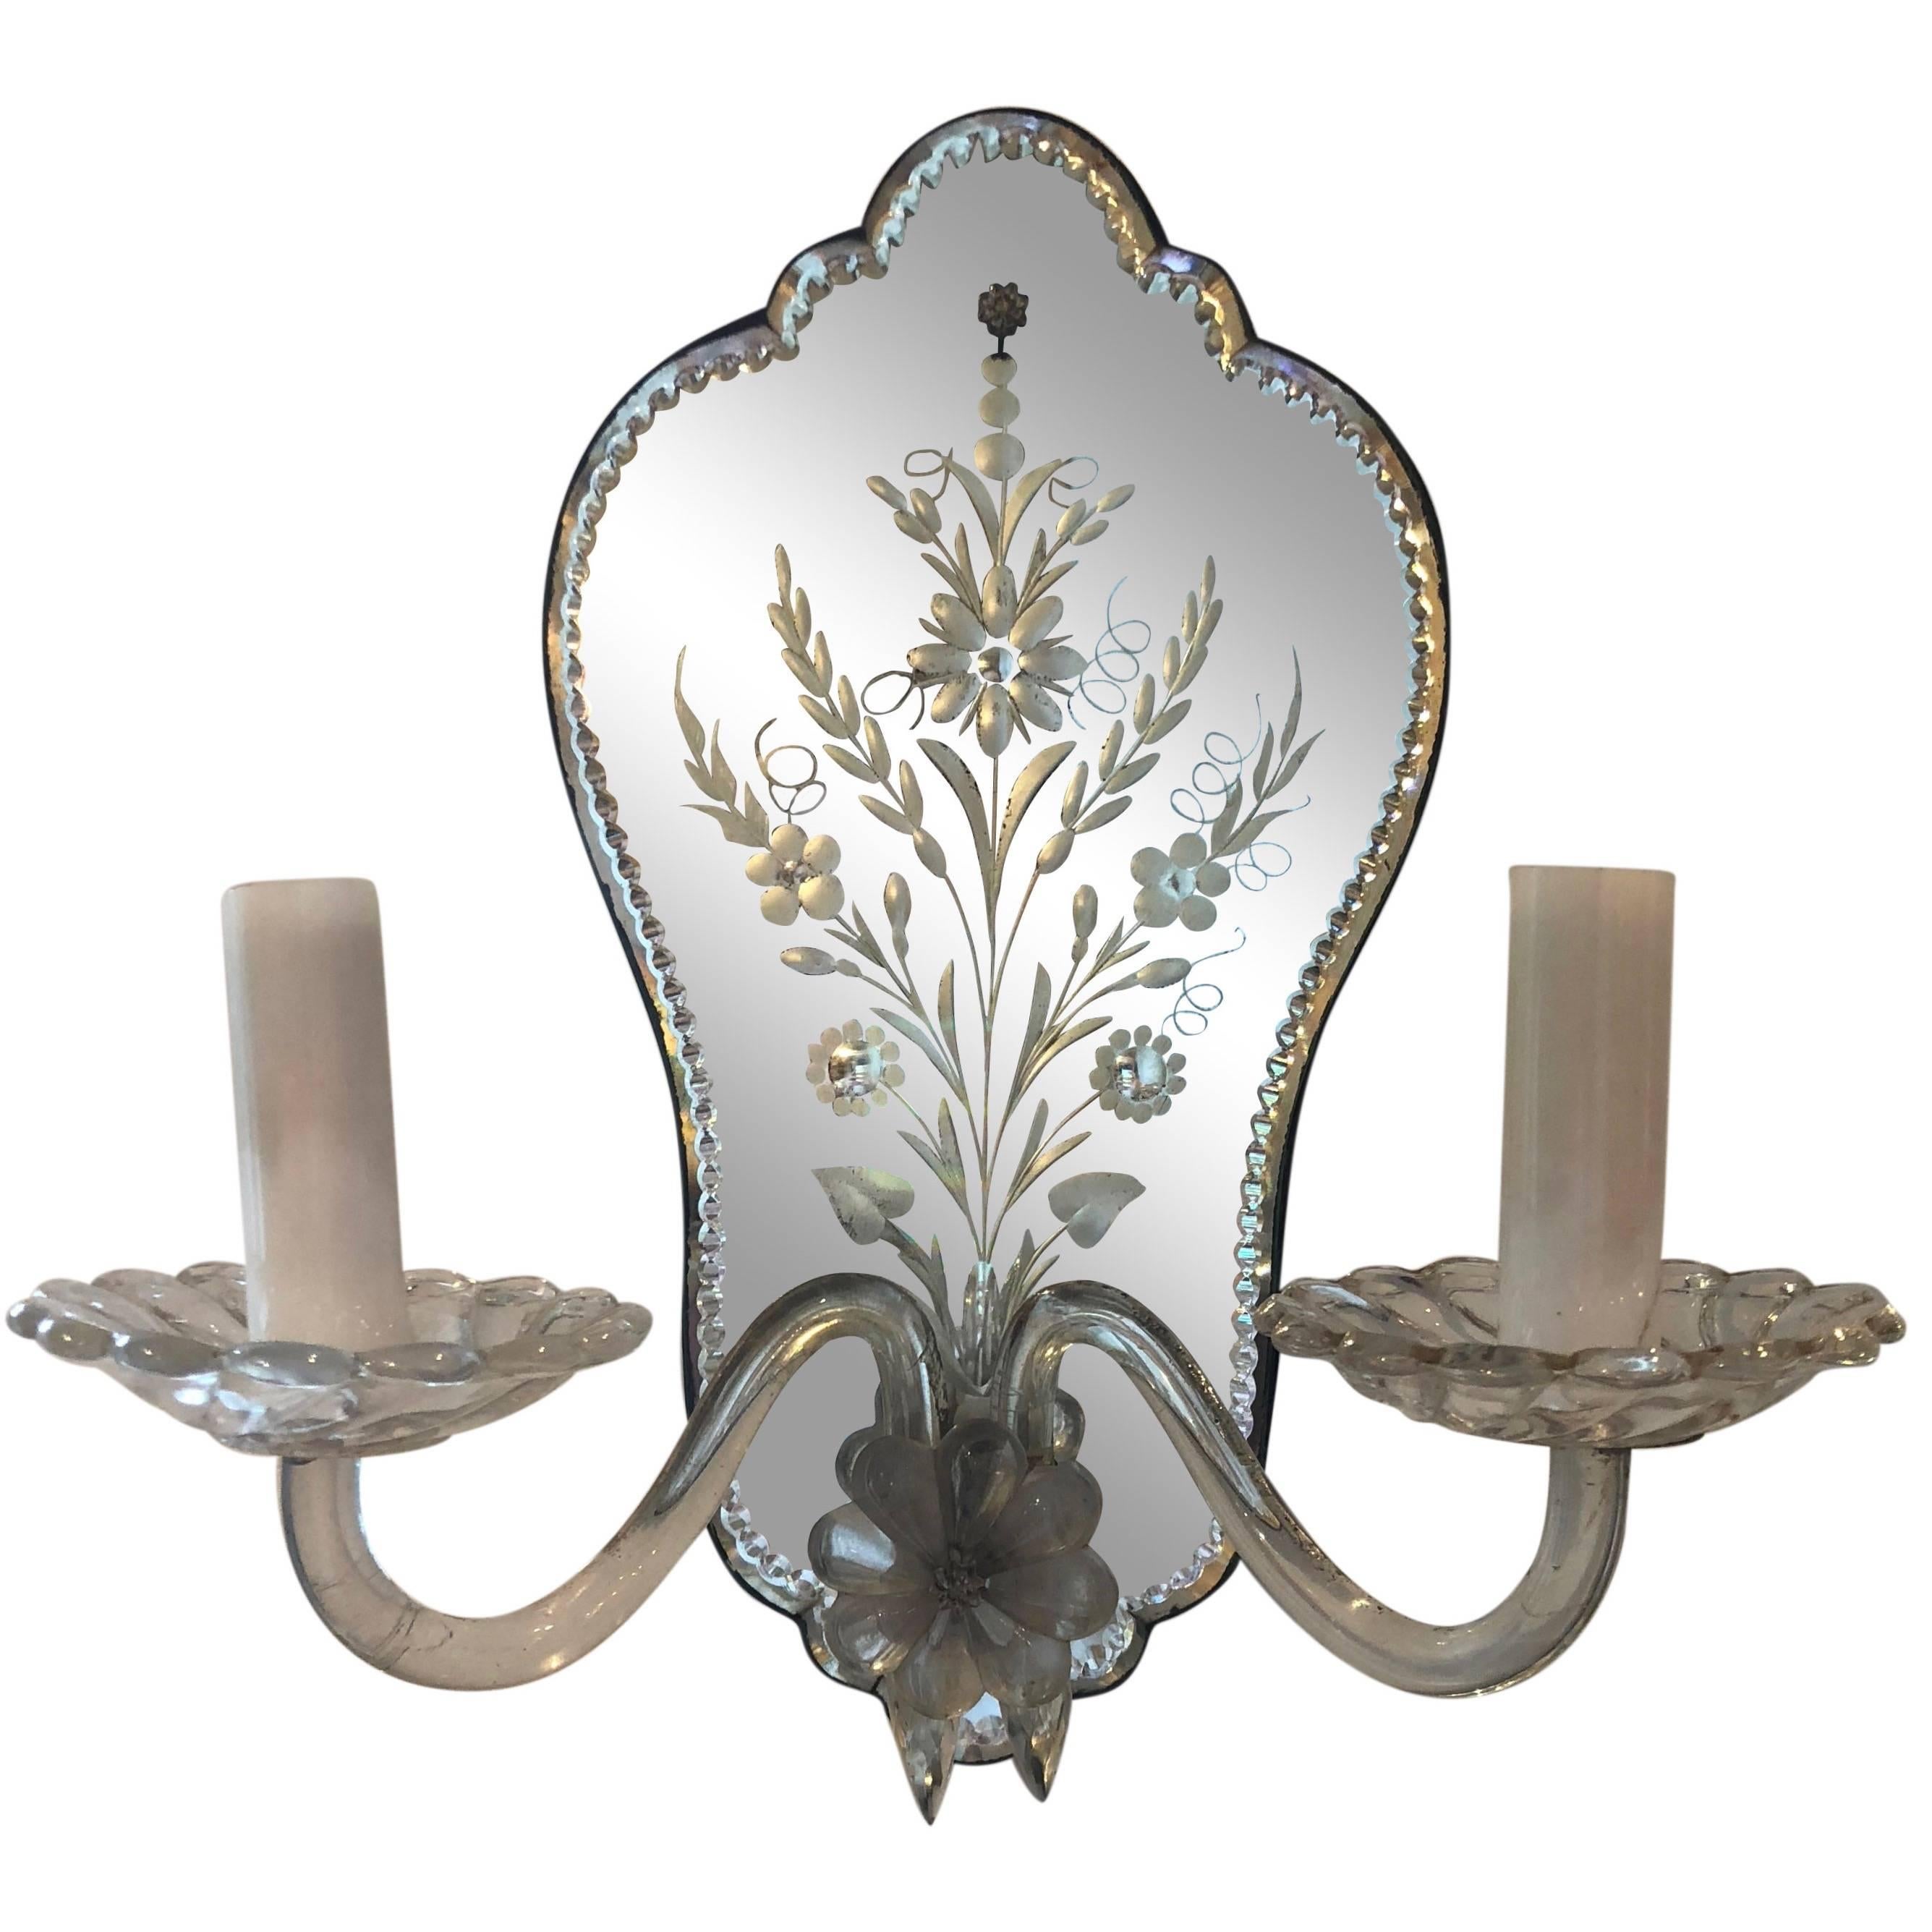 Pair of Venetian vintage mirrored wall sconces with detailed identical floral etching from 1950s.